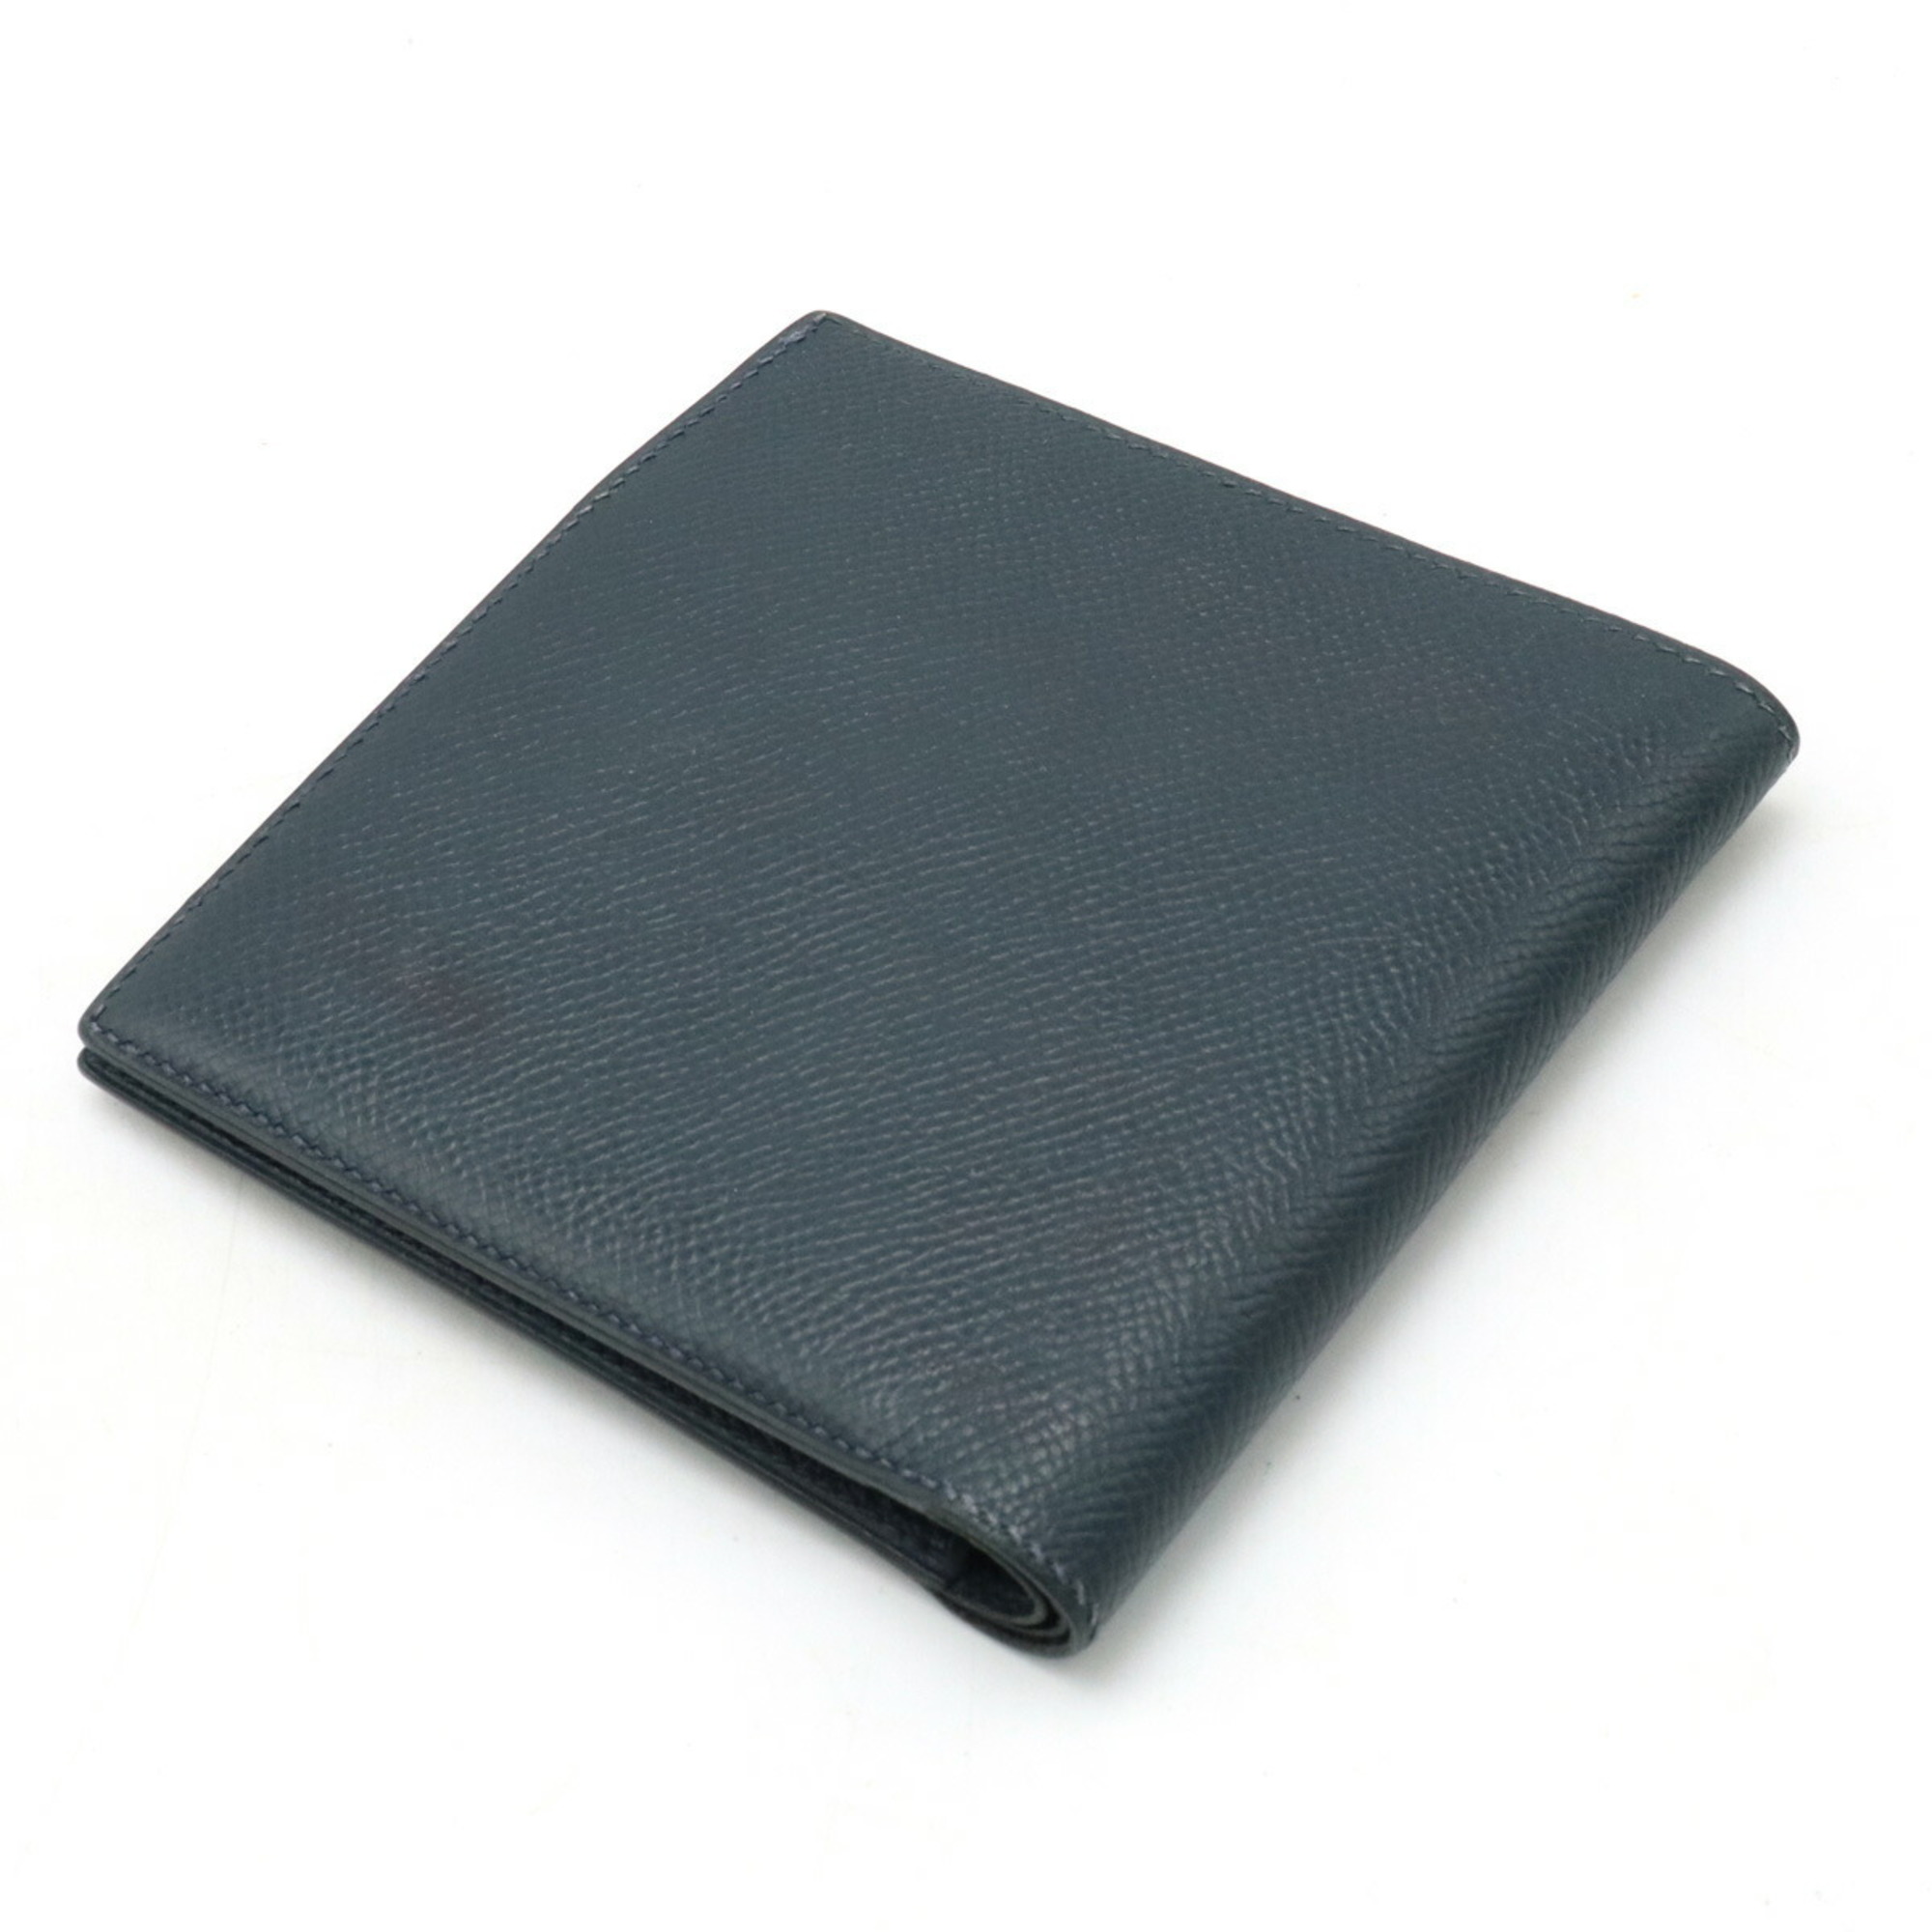 HERMES Galilei Bifold Wallet Couchevel Leather Navy